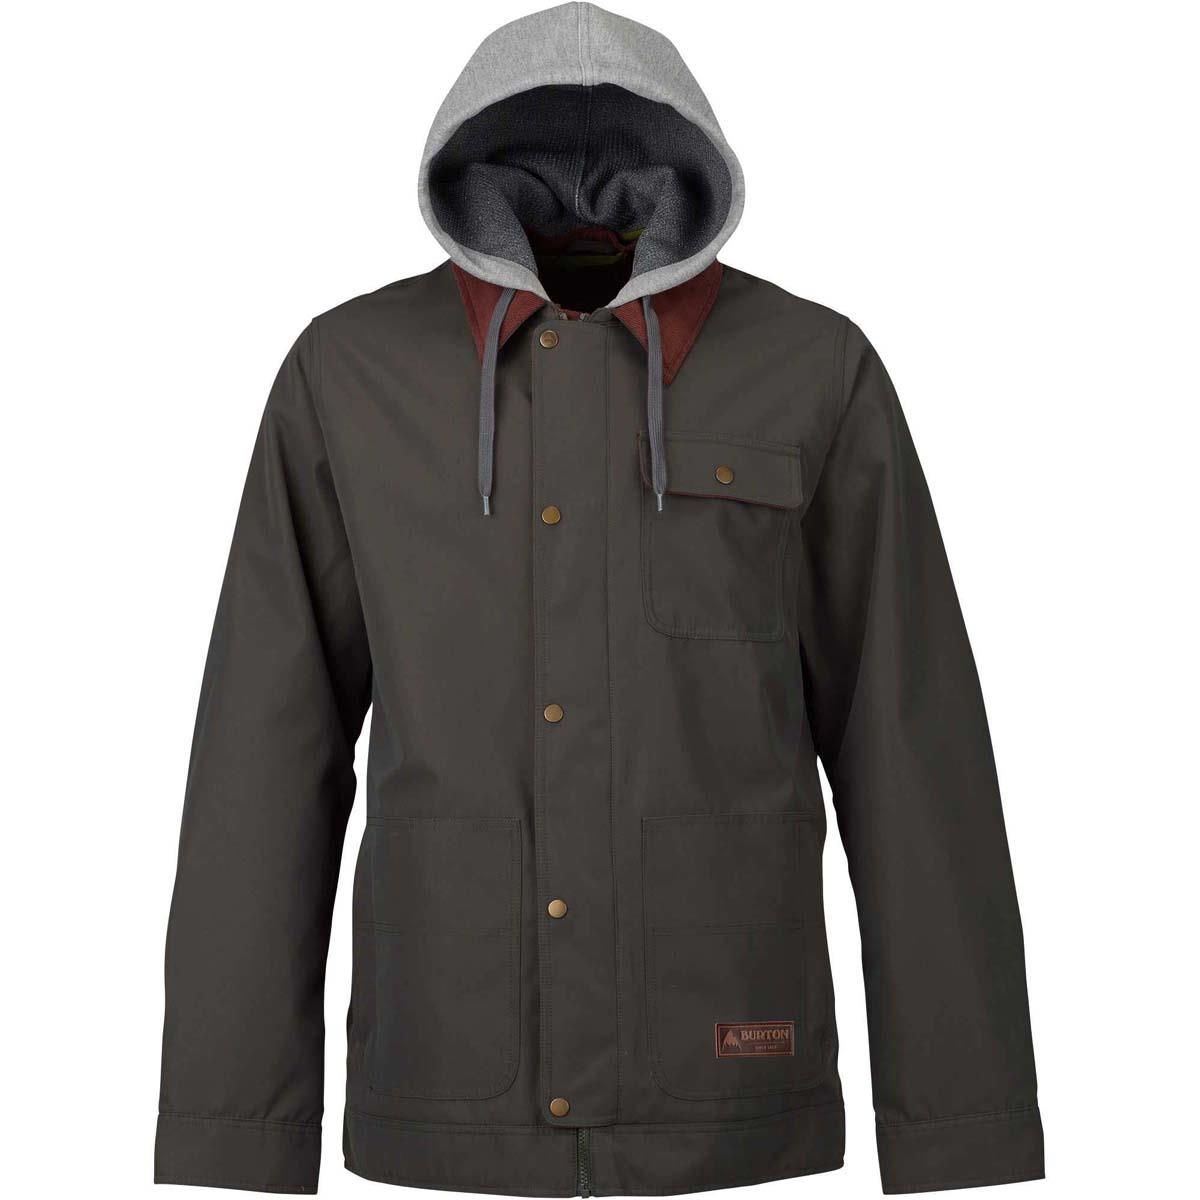 19 Best Men’s Winter Jackets Available Now (2022)